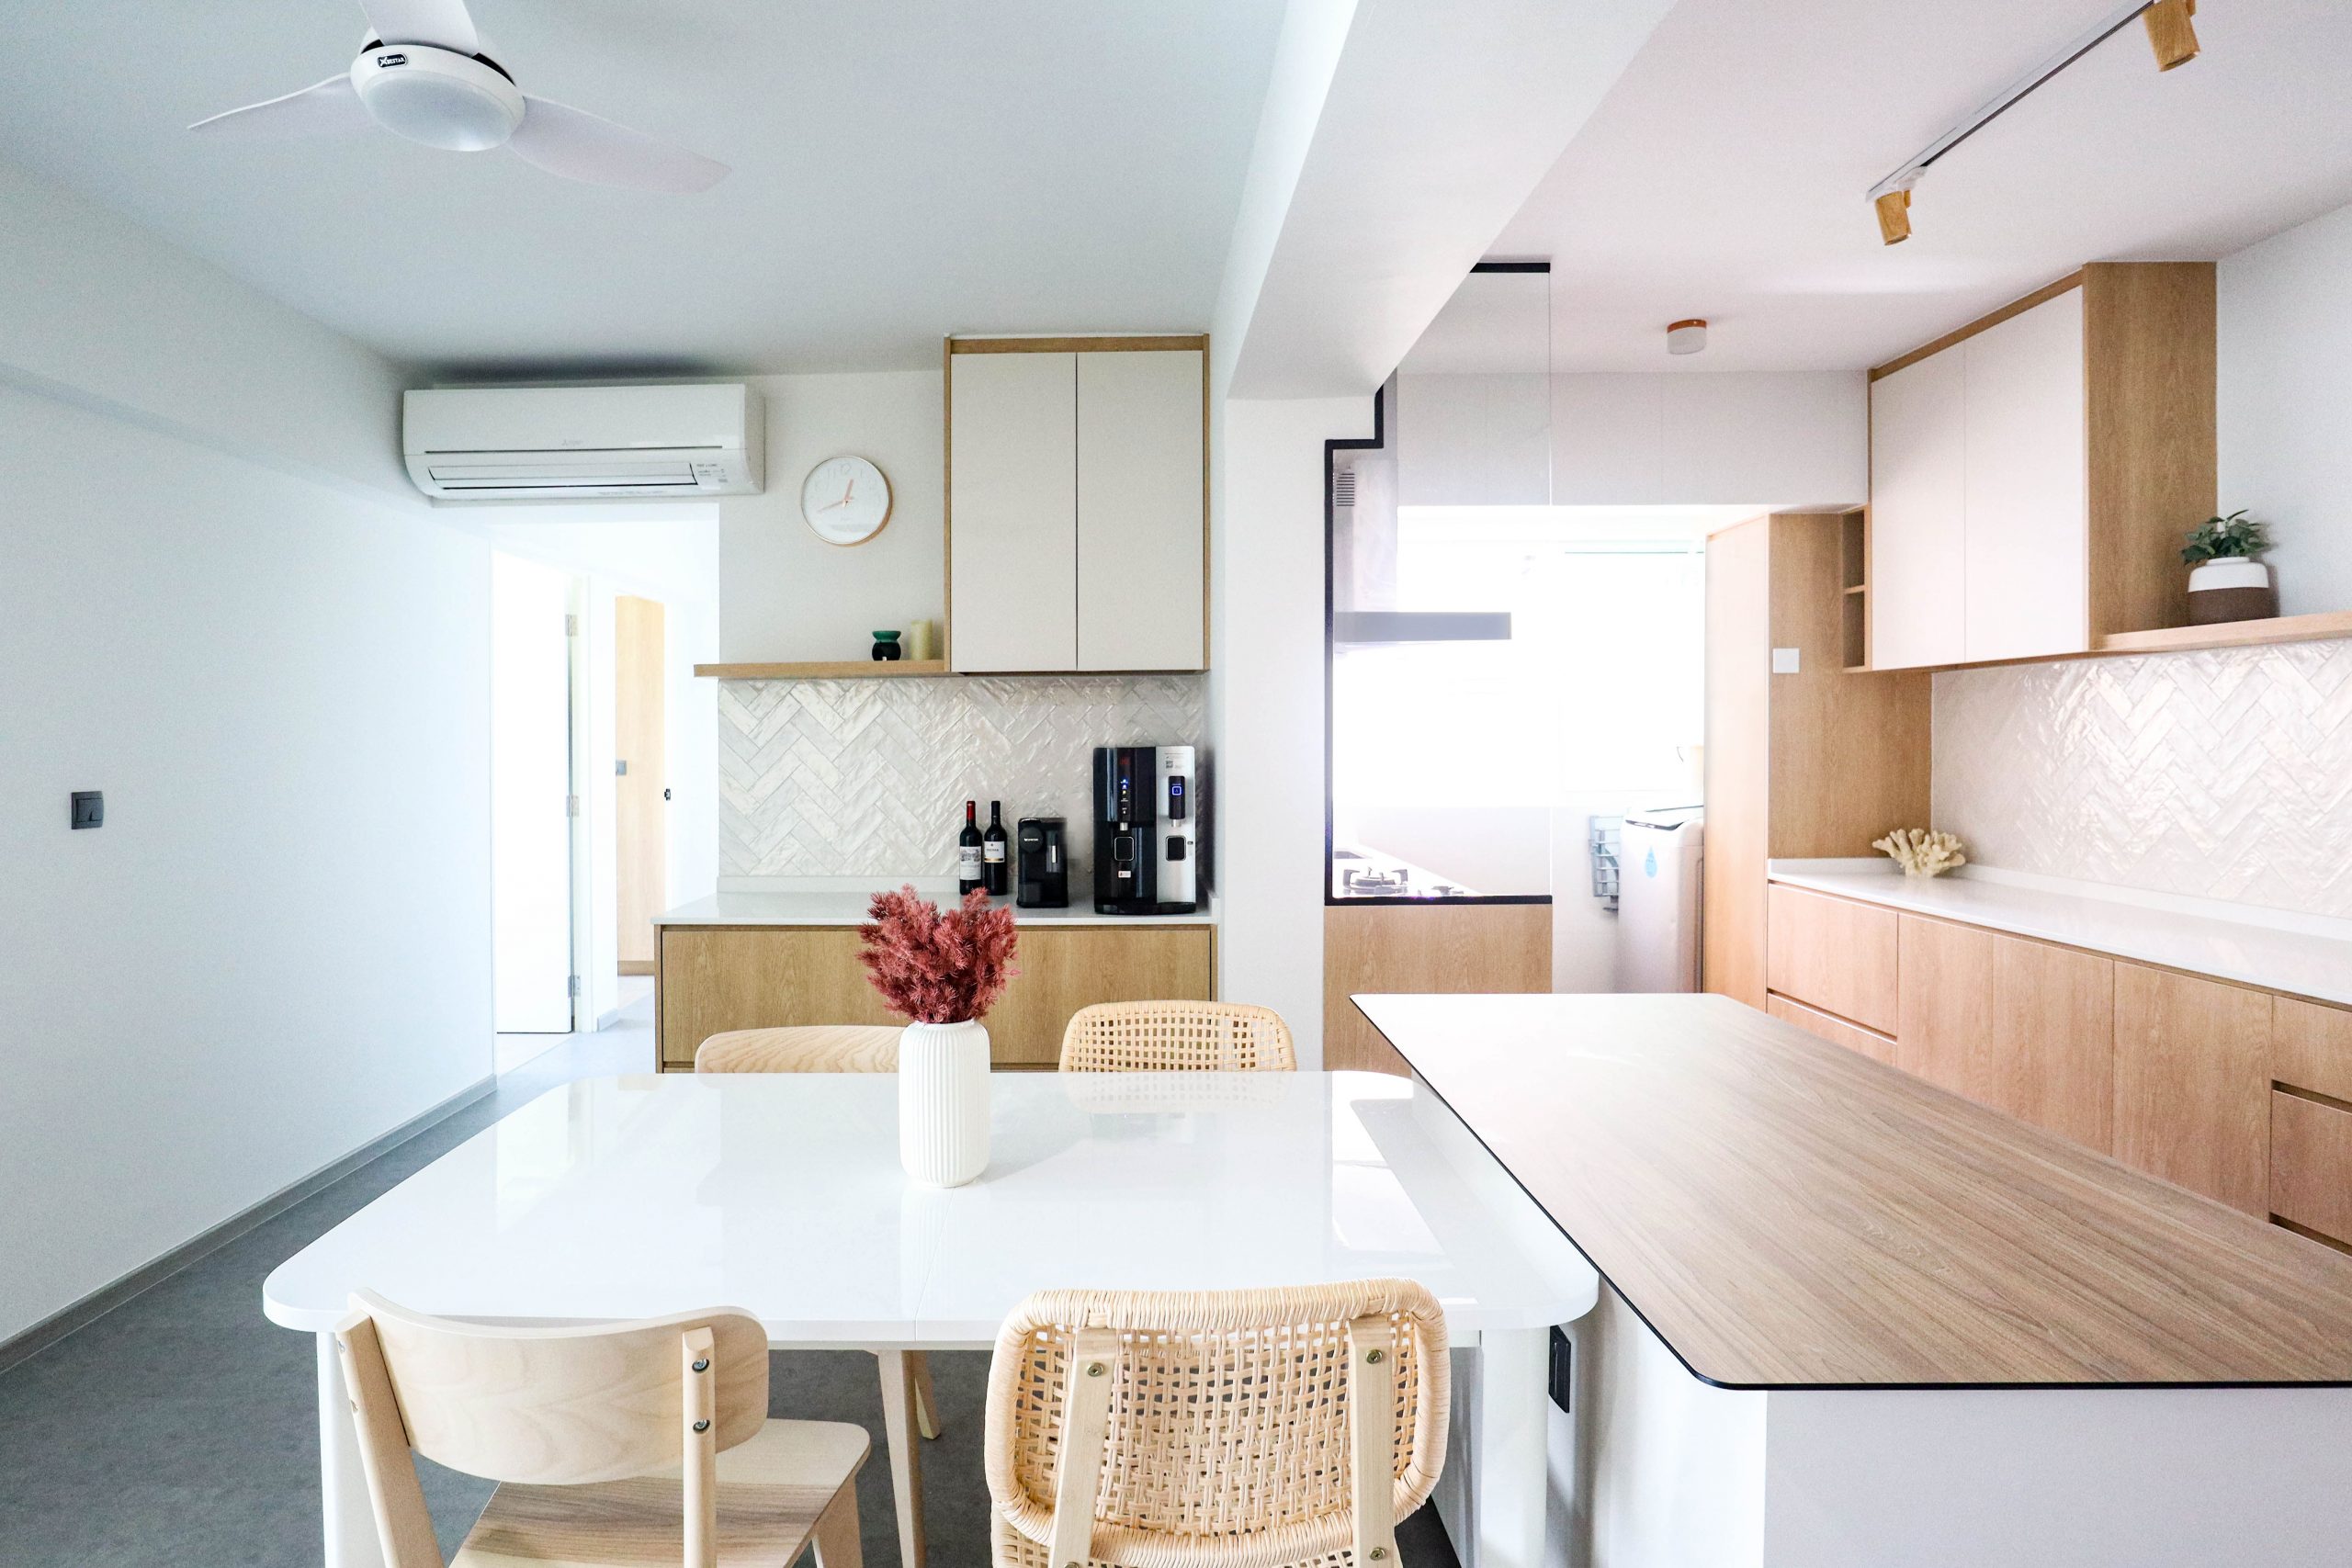 hdb resale kitchen and dining open concept in muji interior design style